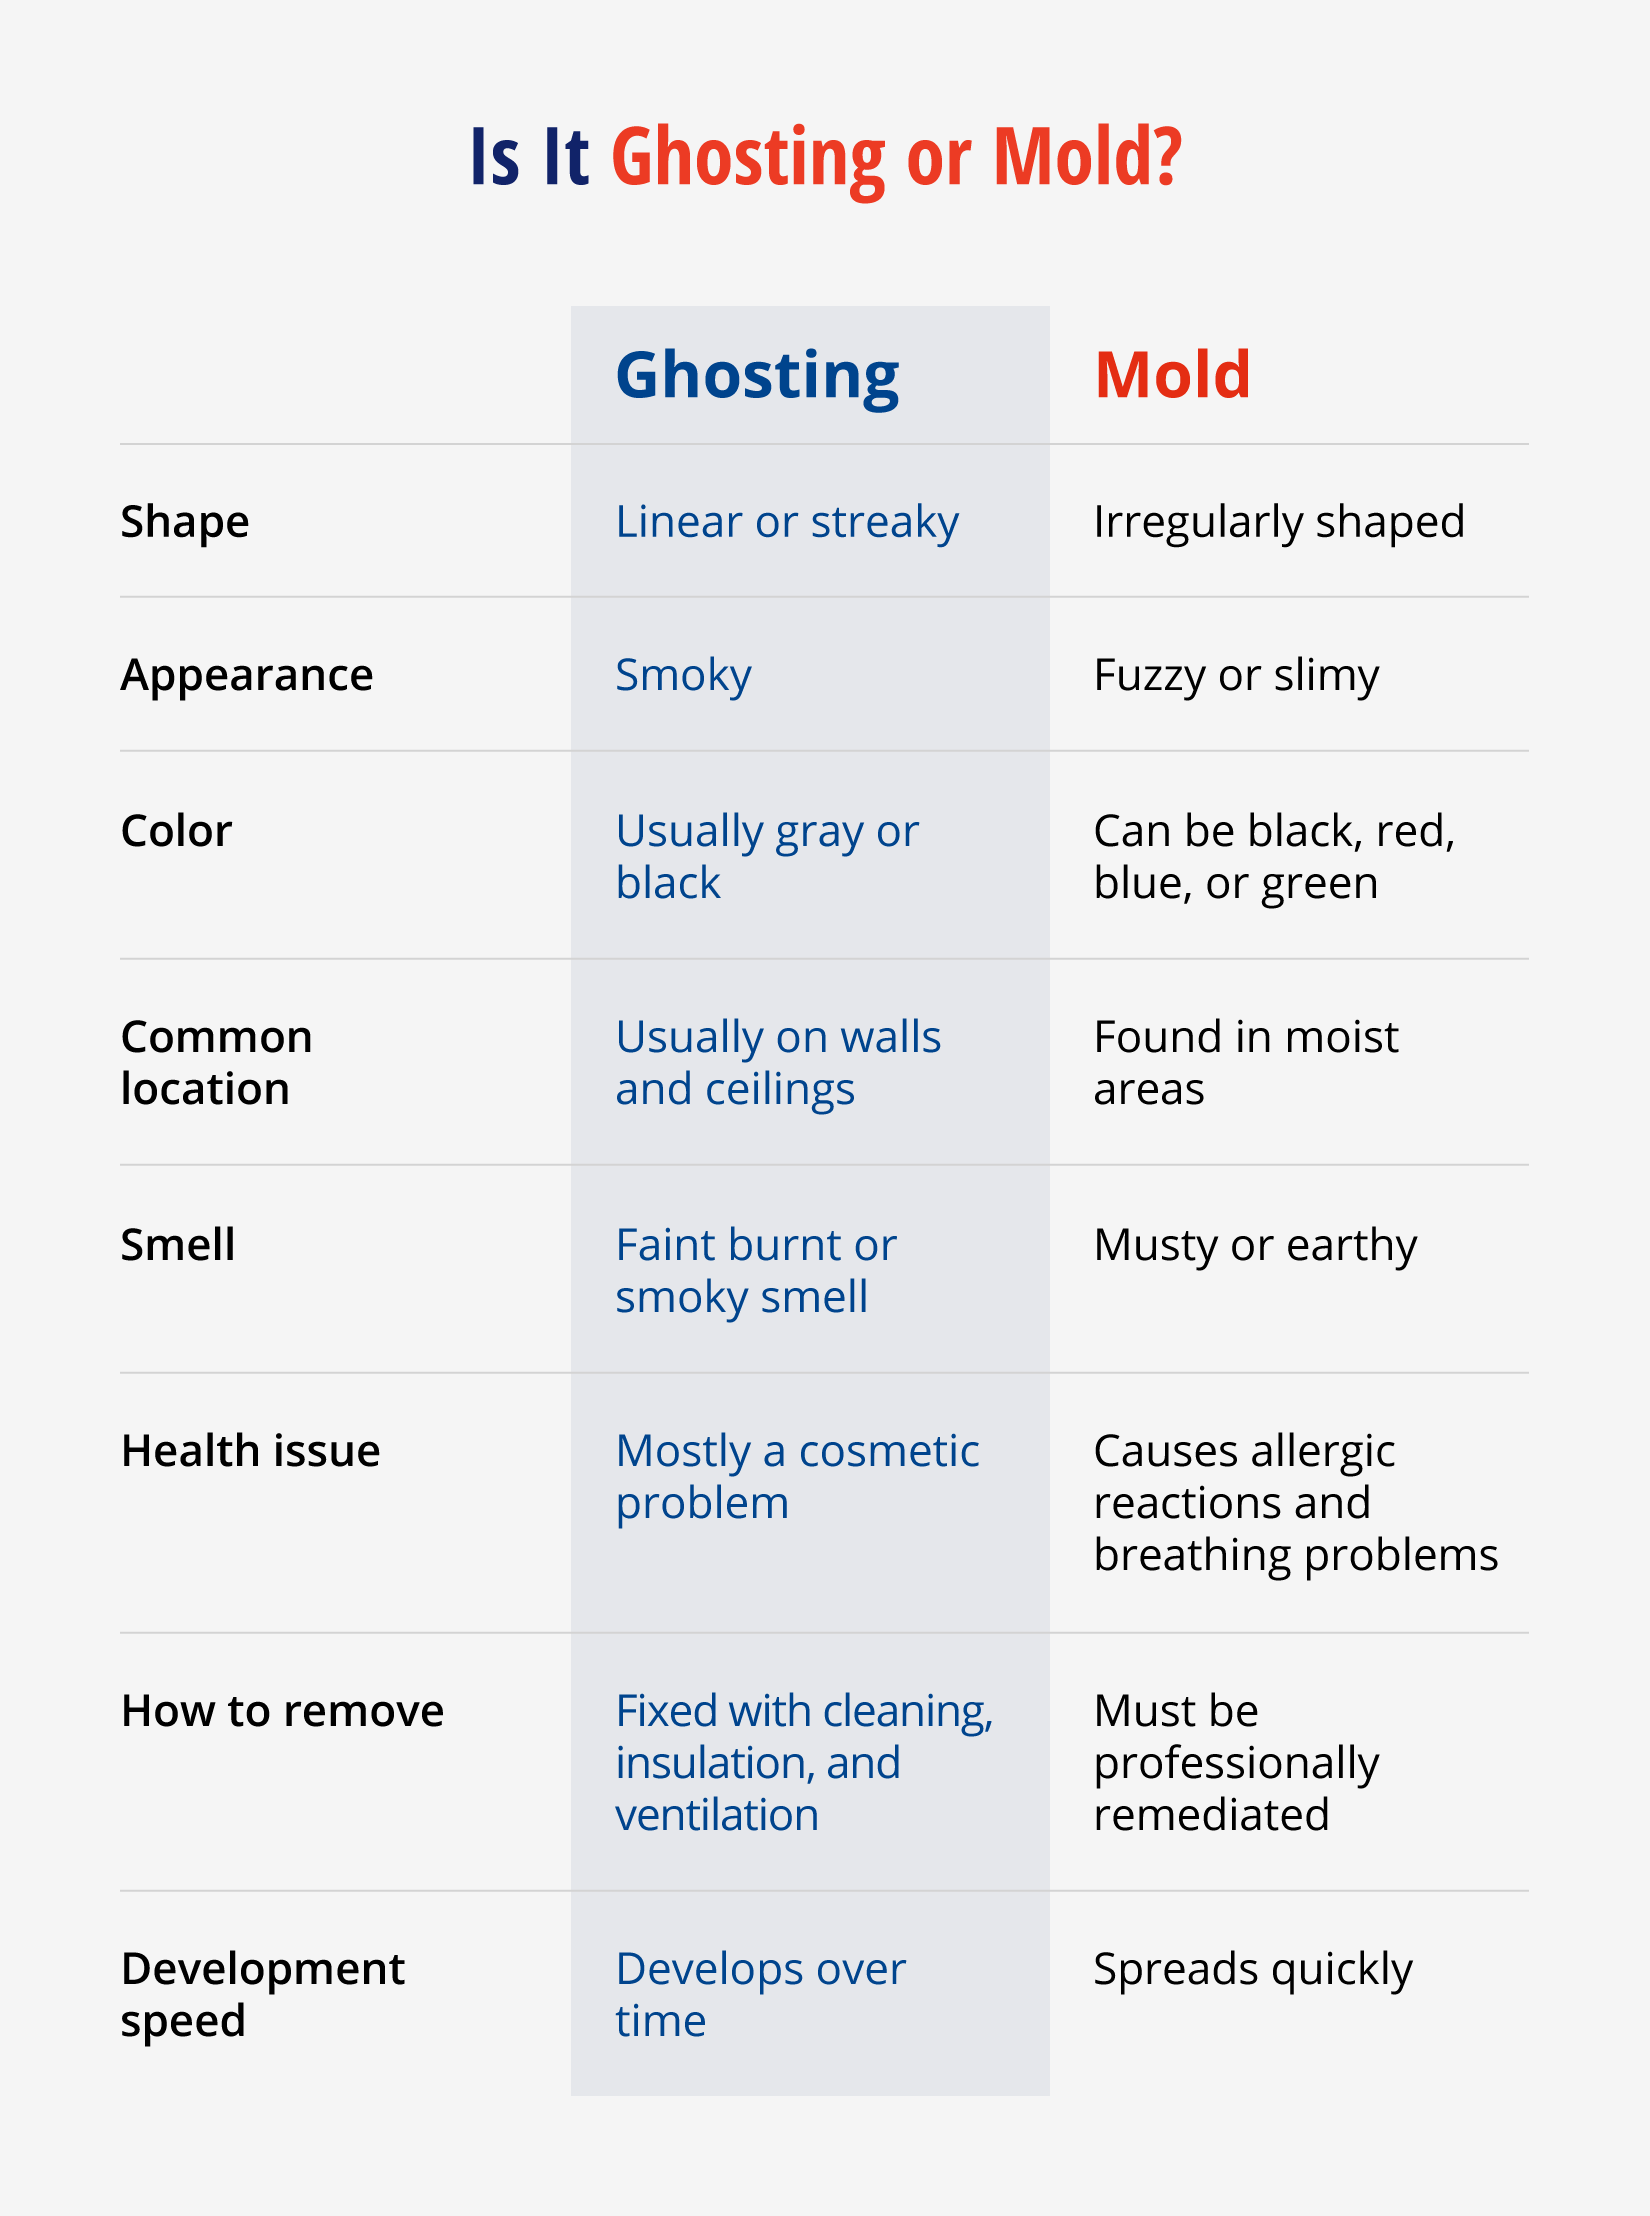 Illustrated table showing the differences between ghosting on walls and mold.